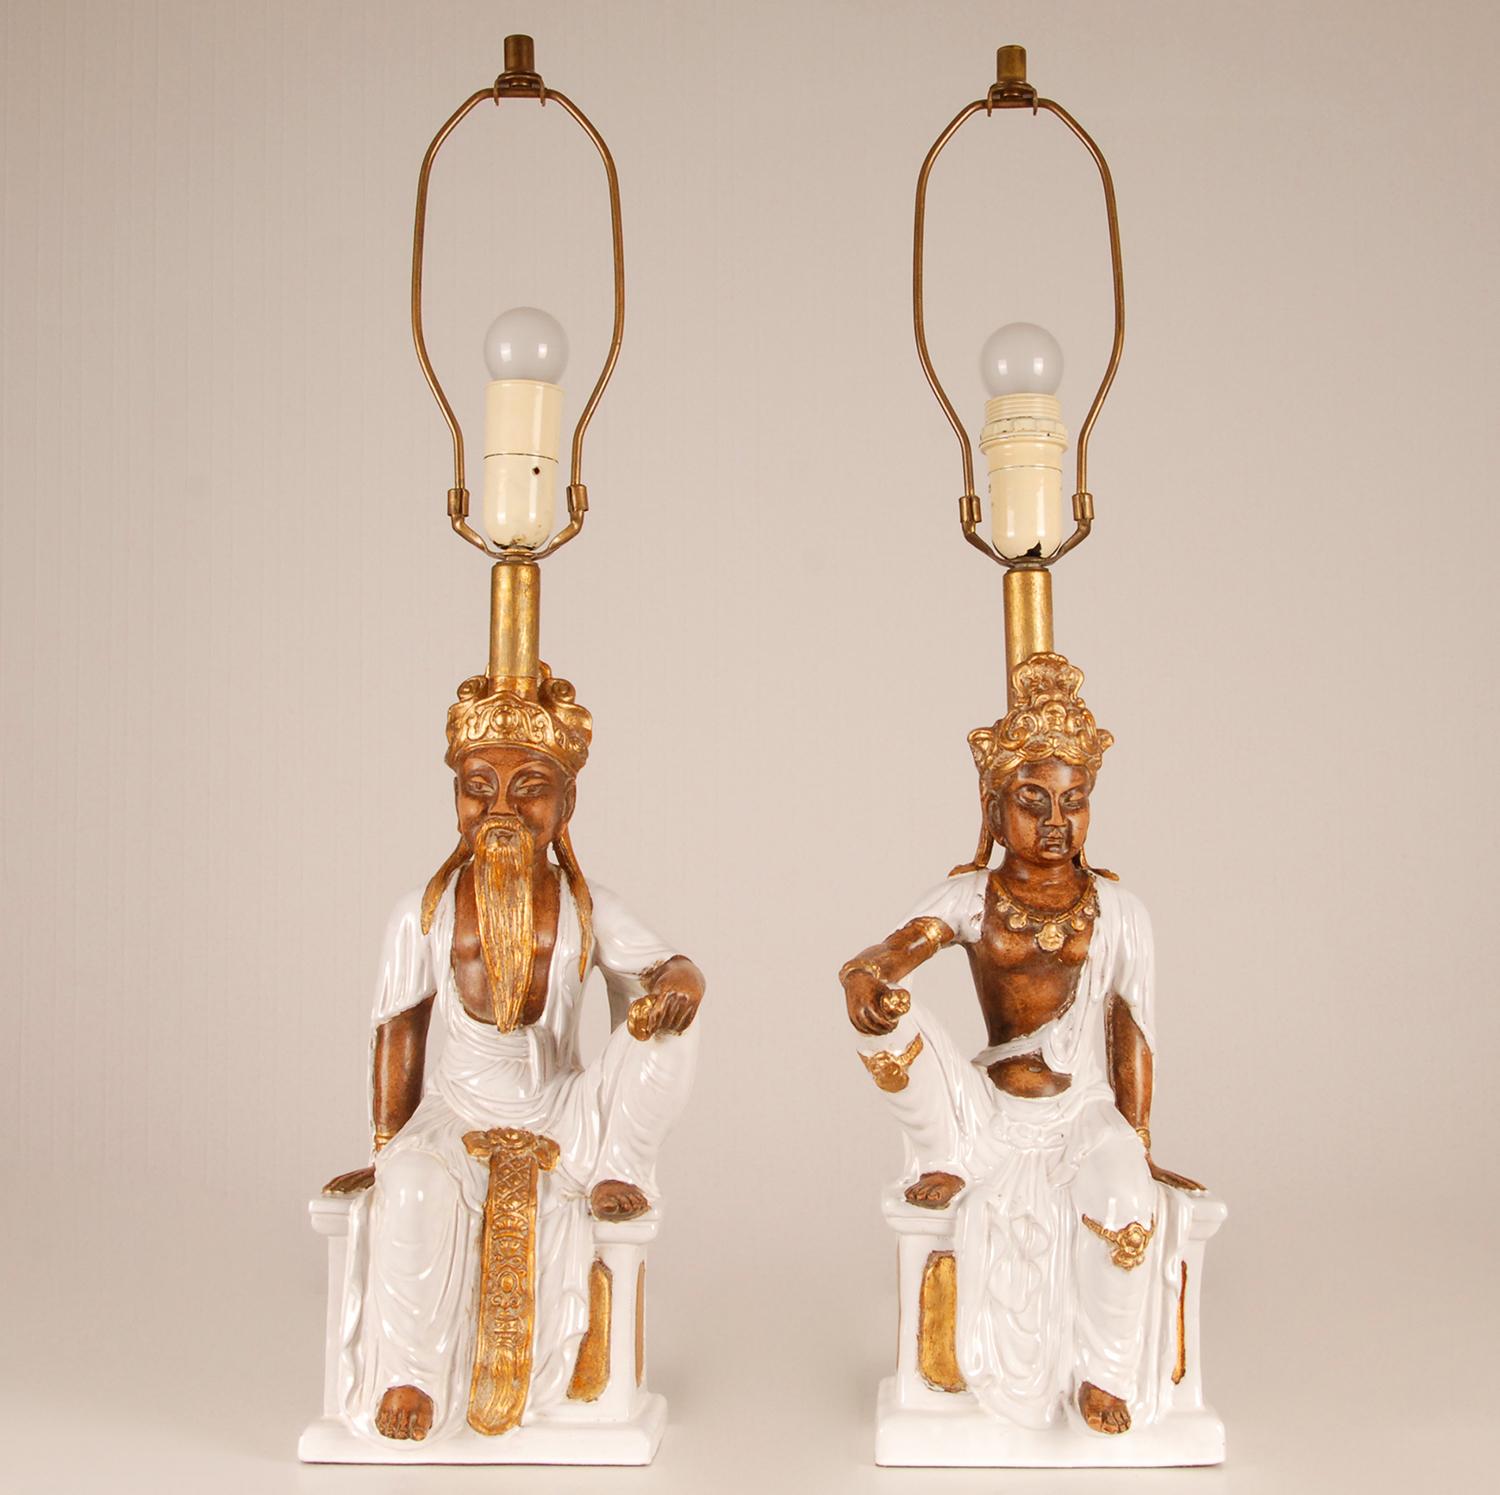 Glazed Vintage Ceramic Table Lamps Italian Chinoiserie Chinese Buddha figures Ceramic For Sale